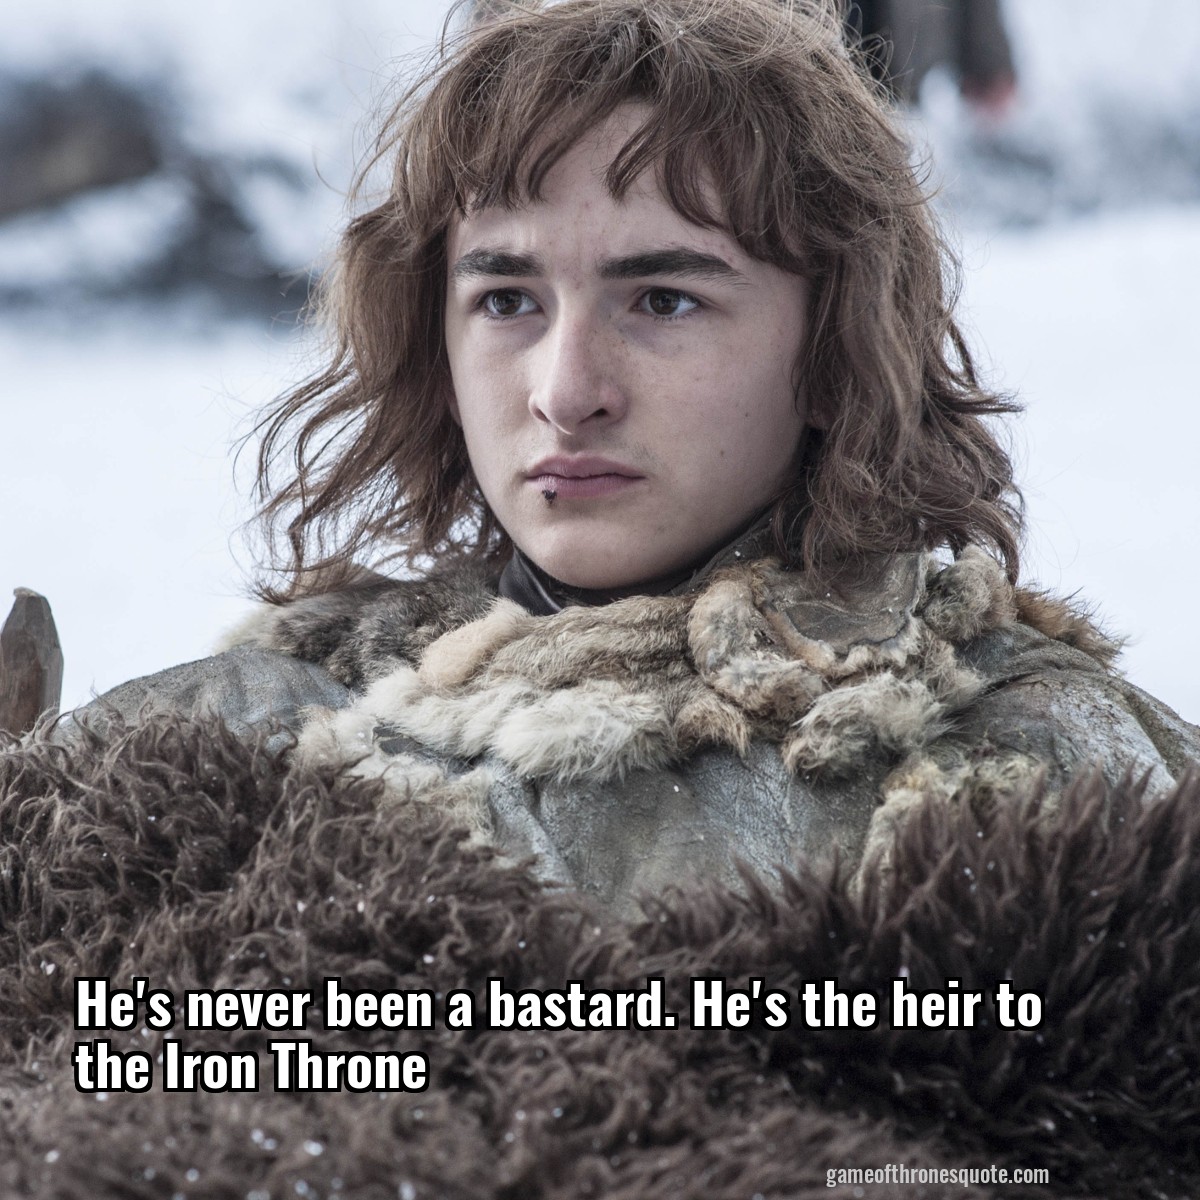 He's never been a bastard. He's the heir to the Iron Throne